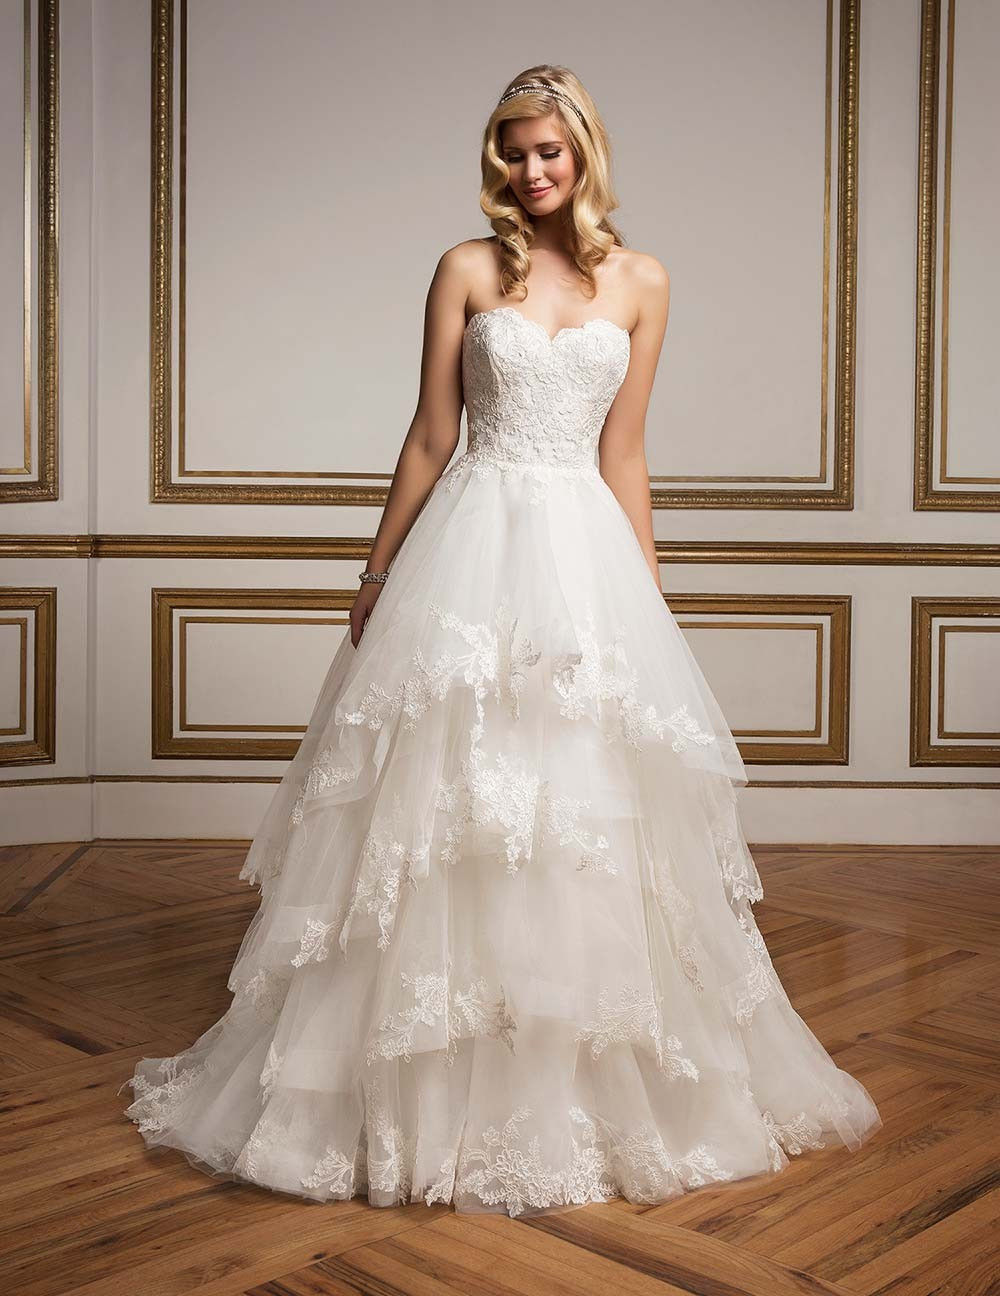 Tiered Wedding Dress
 Tiered Wedding Dresses 21 Show Stopping Styles